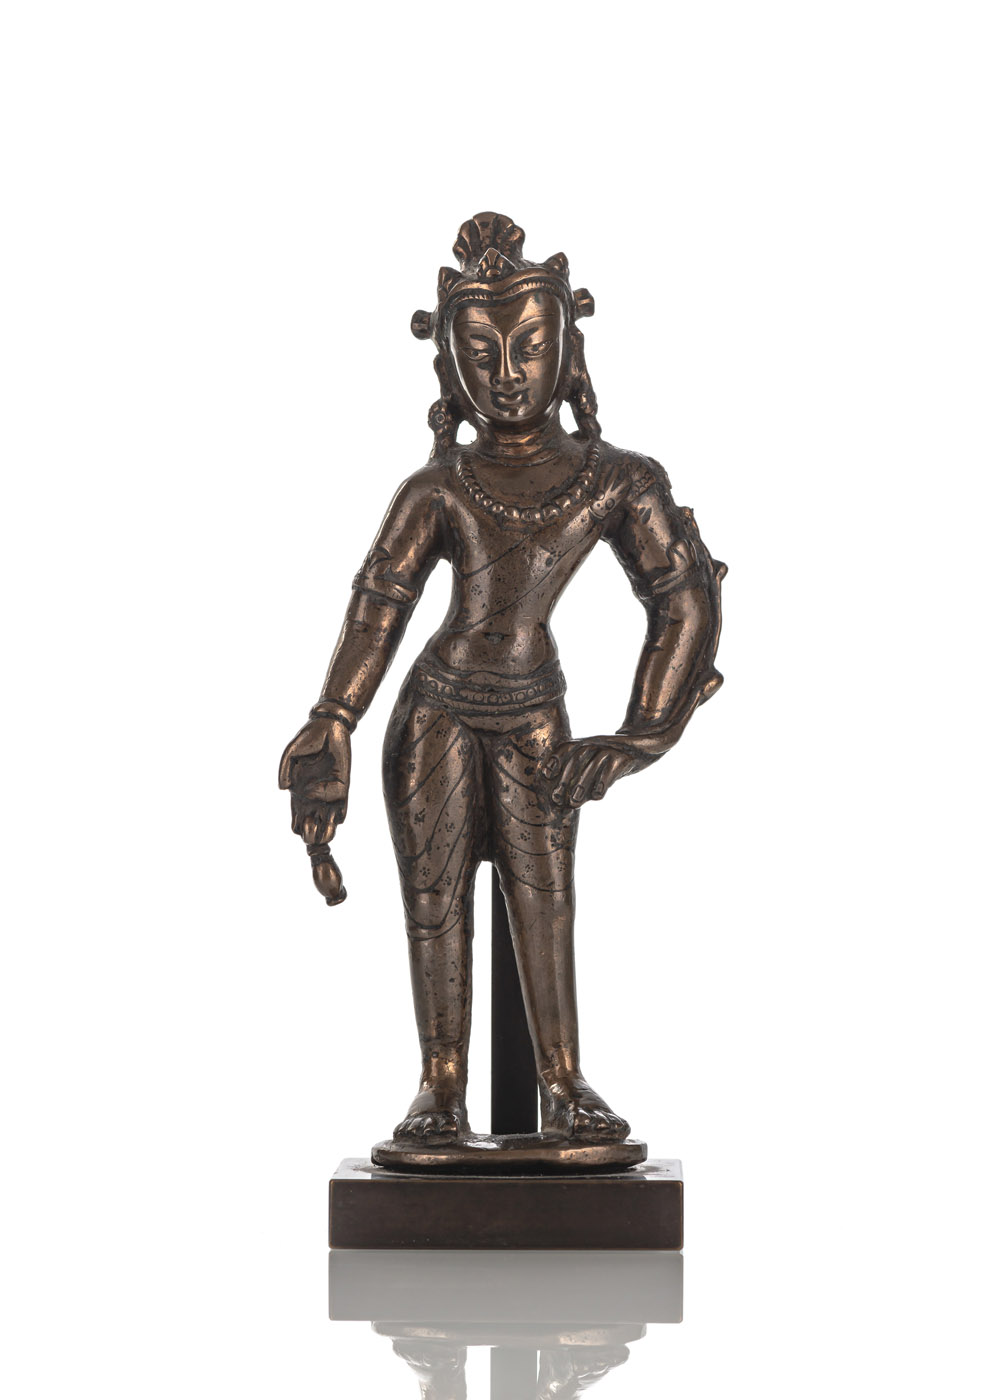 <b>A BRONZE FIGURE OF MAITREYA WITH TRACES OF SILVER INLAYS</b>